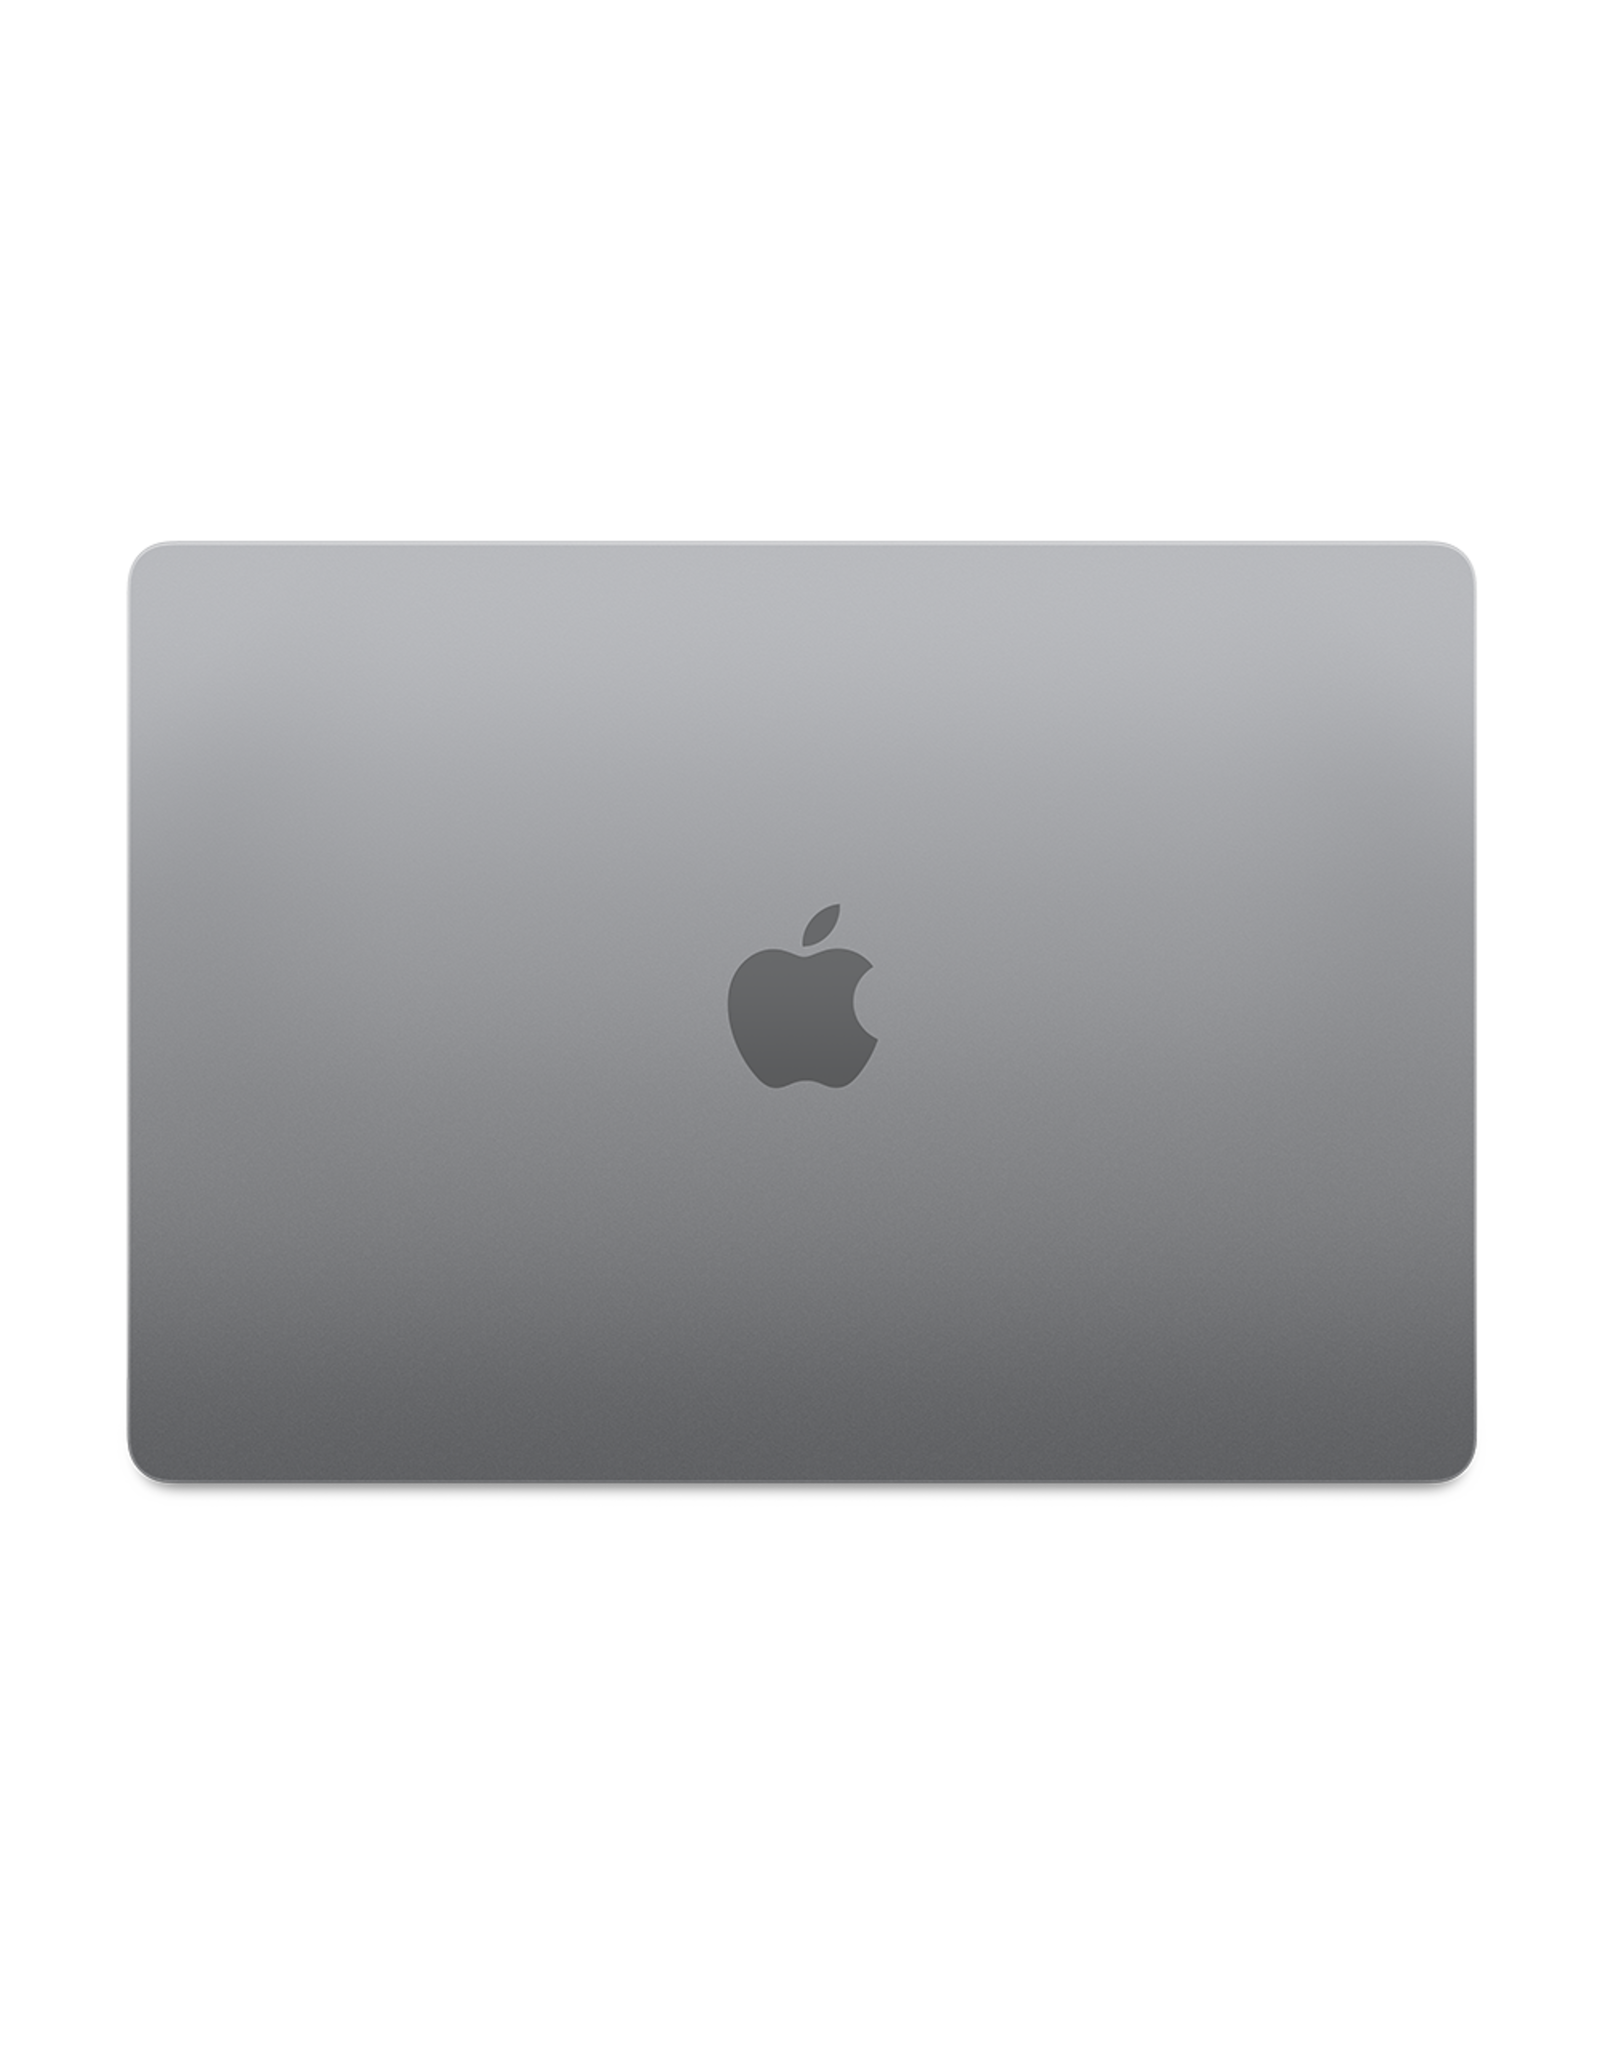 Apple 15-inch MacBook Air: Apple M2 chip with 8-core CPU and 10-core GPU, 256GB - Space Gray